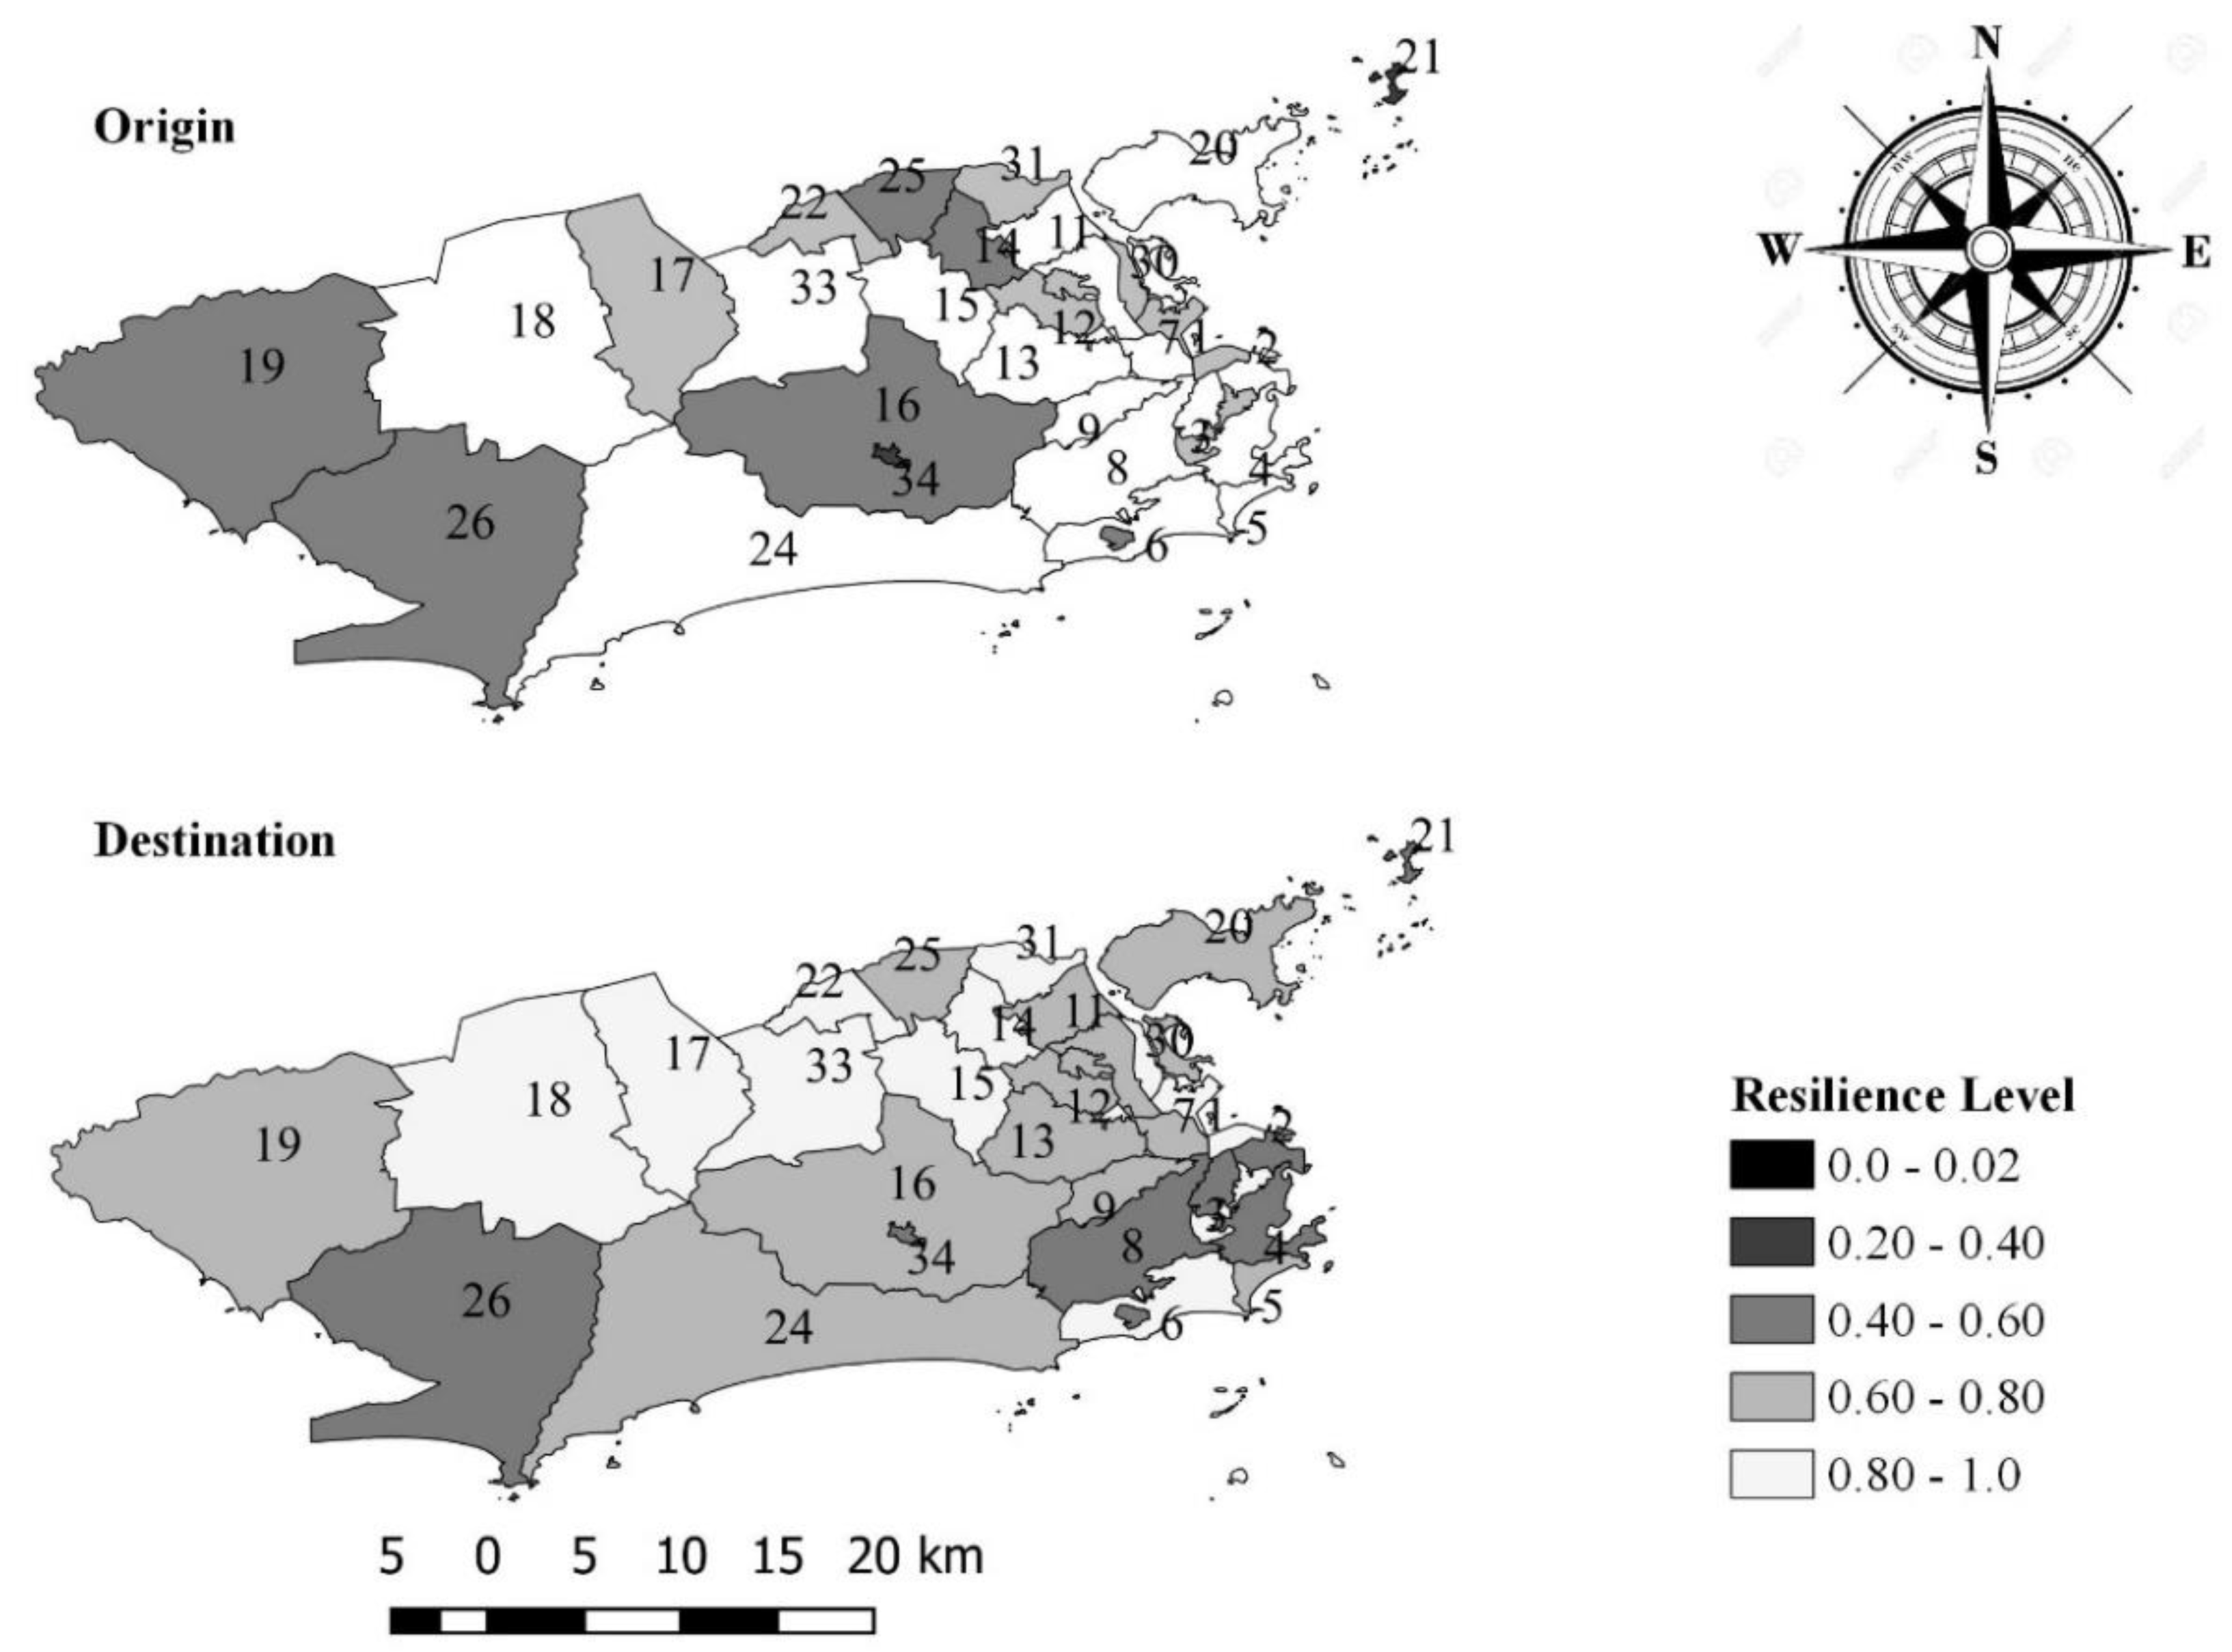 Sustainability Free Full Text Resilience And Vulnerability Of Public Transportation Fare Systems The Case Of The City Of Rio De Janeiro Brazil Html